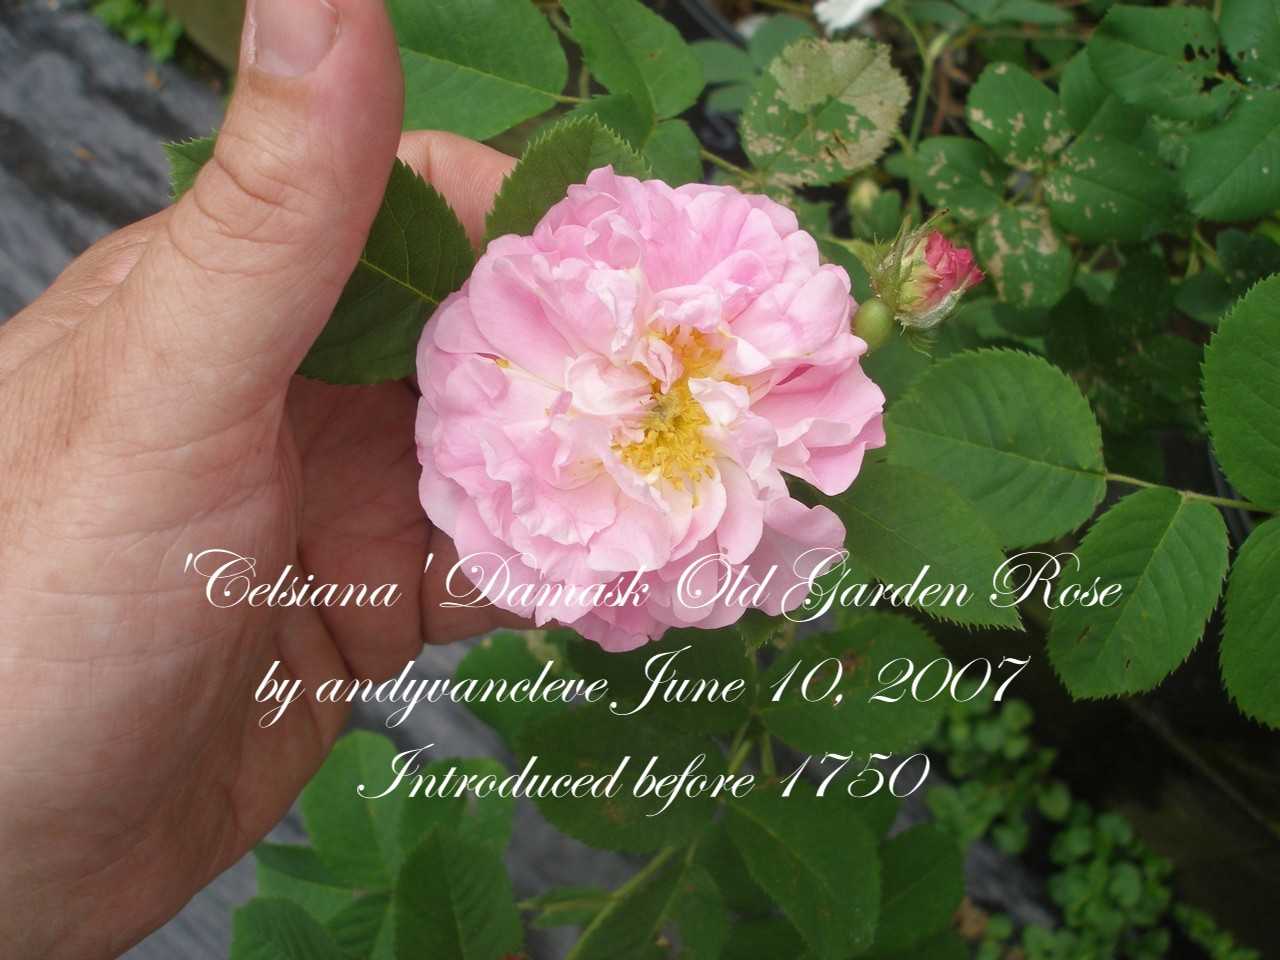 Damask Roses Pictures Of One Of The Four Ancient Classes Of Roses That Are Commonly Referred To As Old Roses Propagated And Grown For Sale By Azalea House Flowering Shrub Farm With